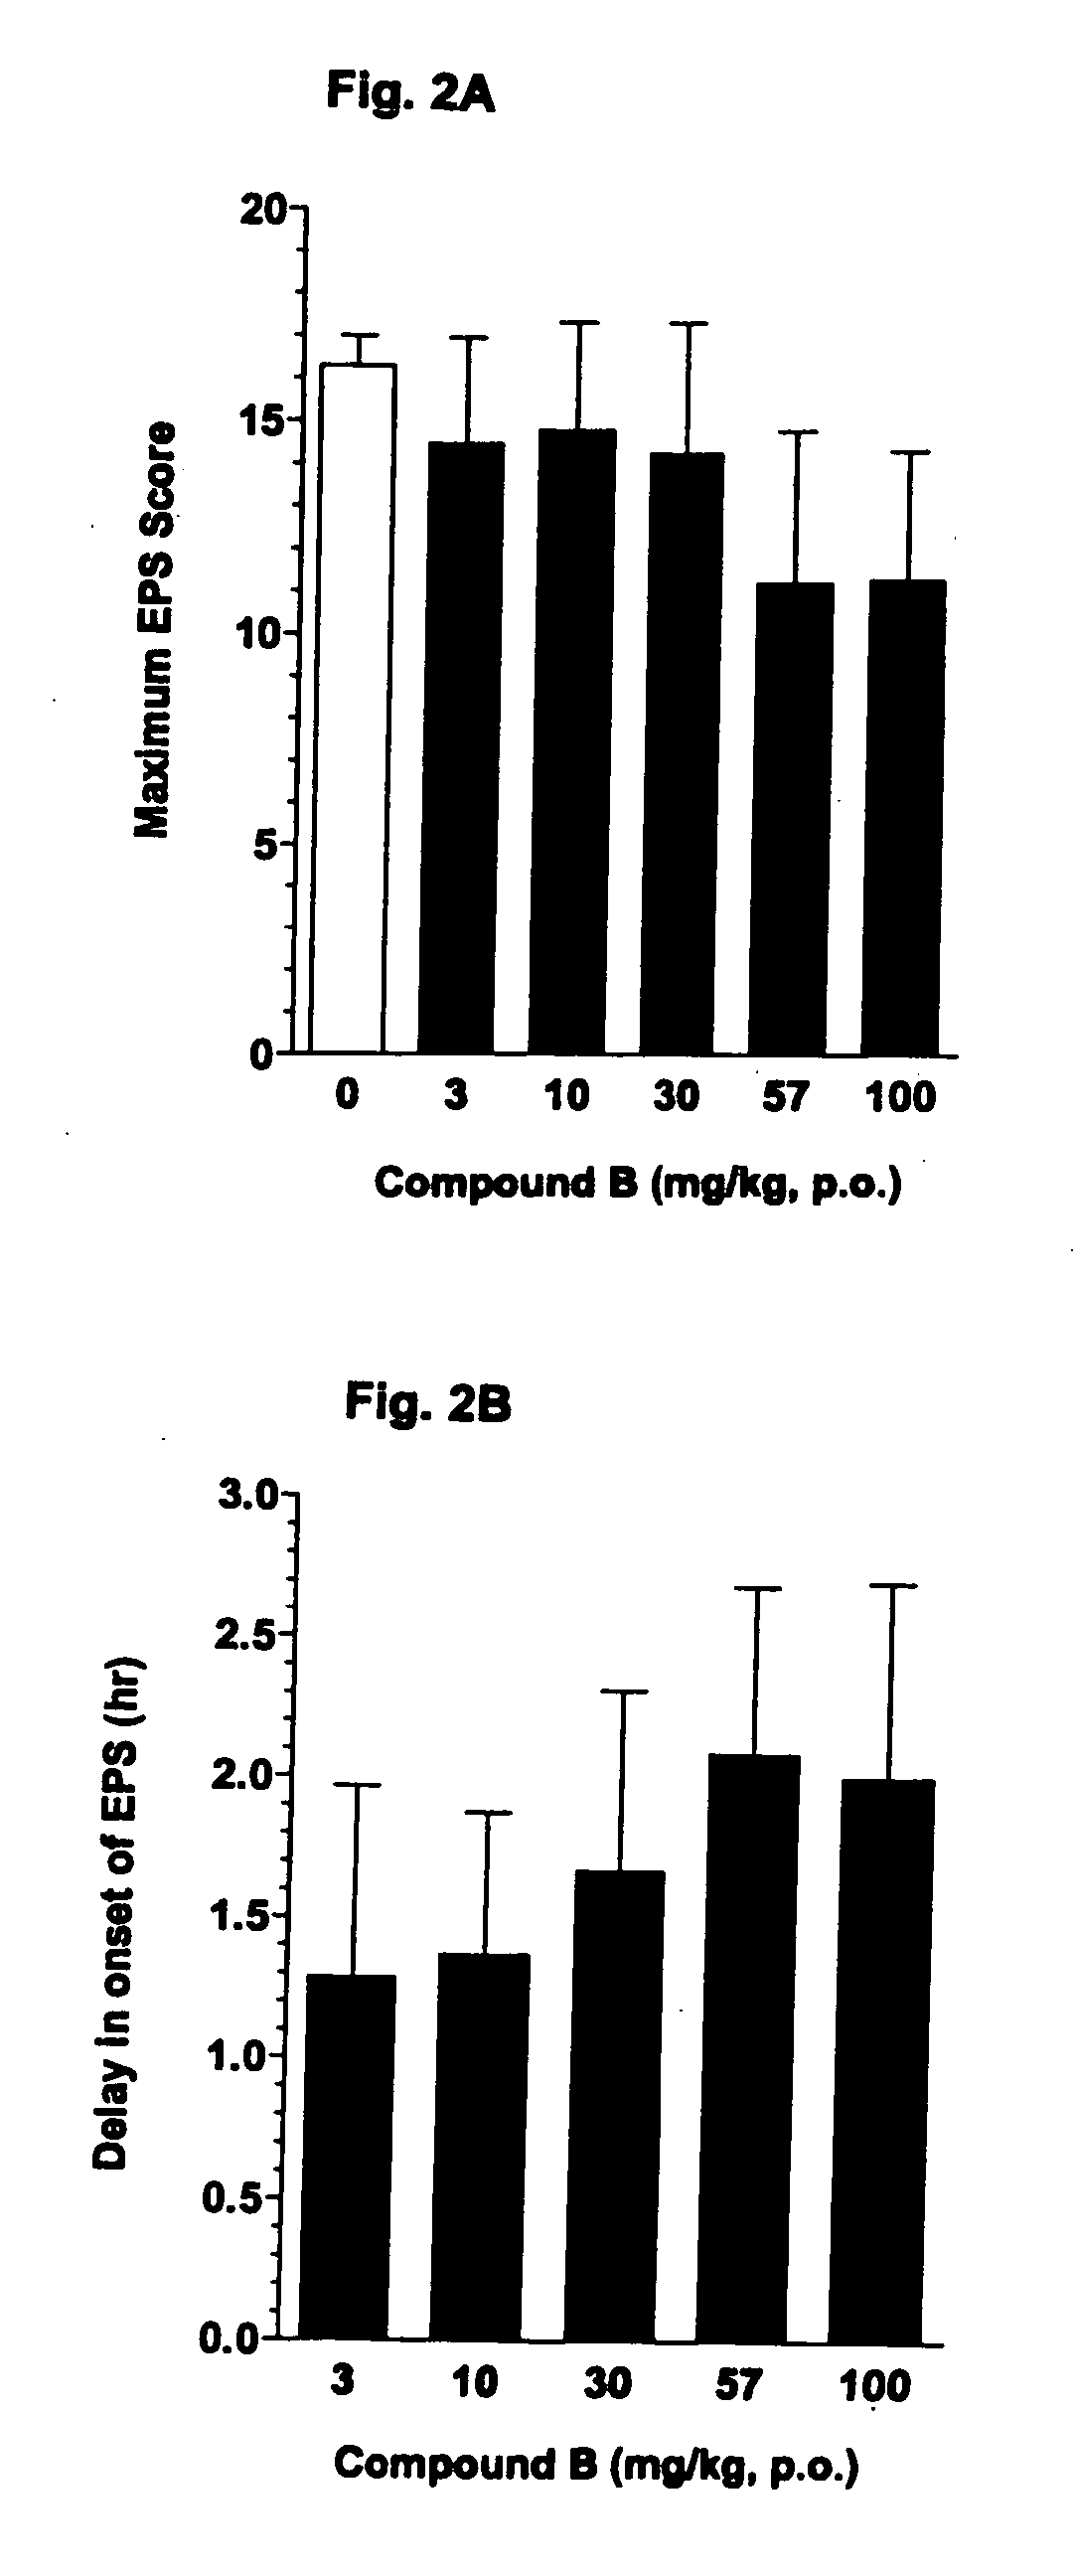 Adenosine A2a receptor antagonists for the treatment of extra-pyramidal syndrome and other movement disorders